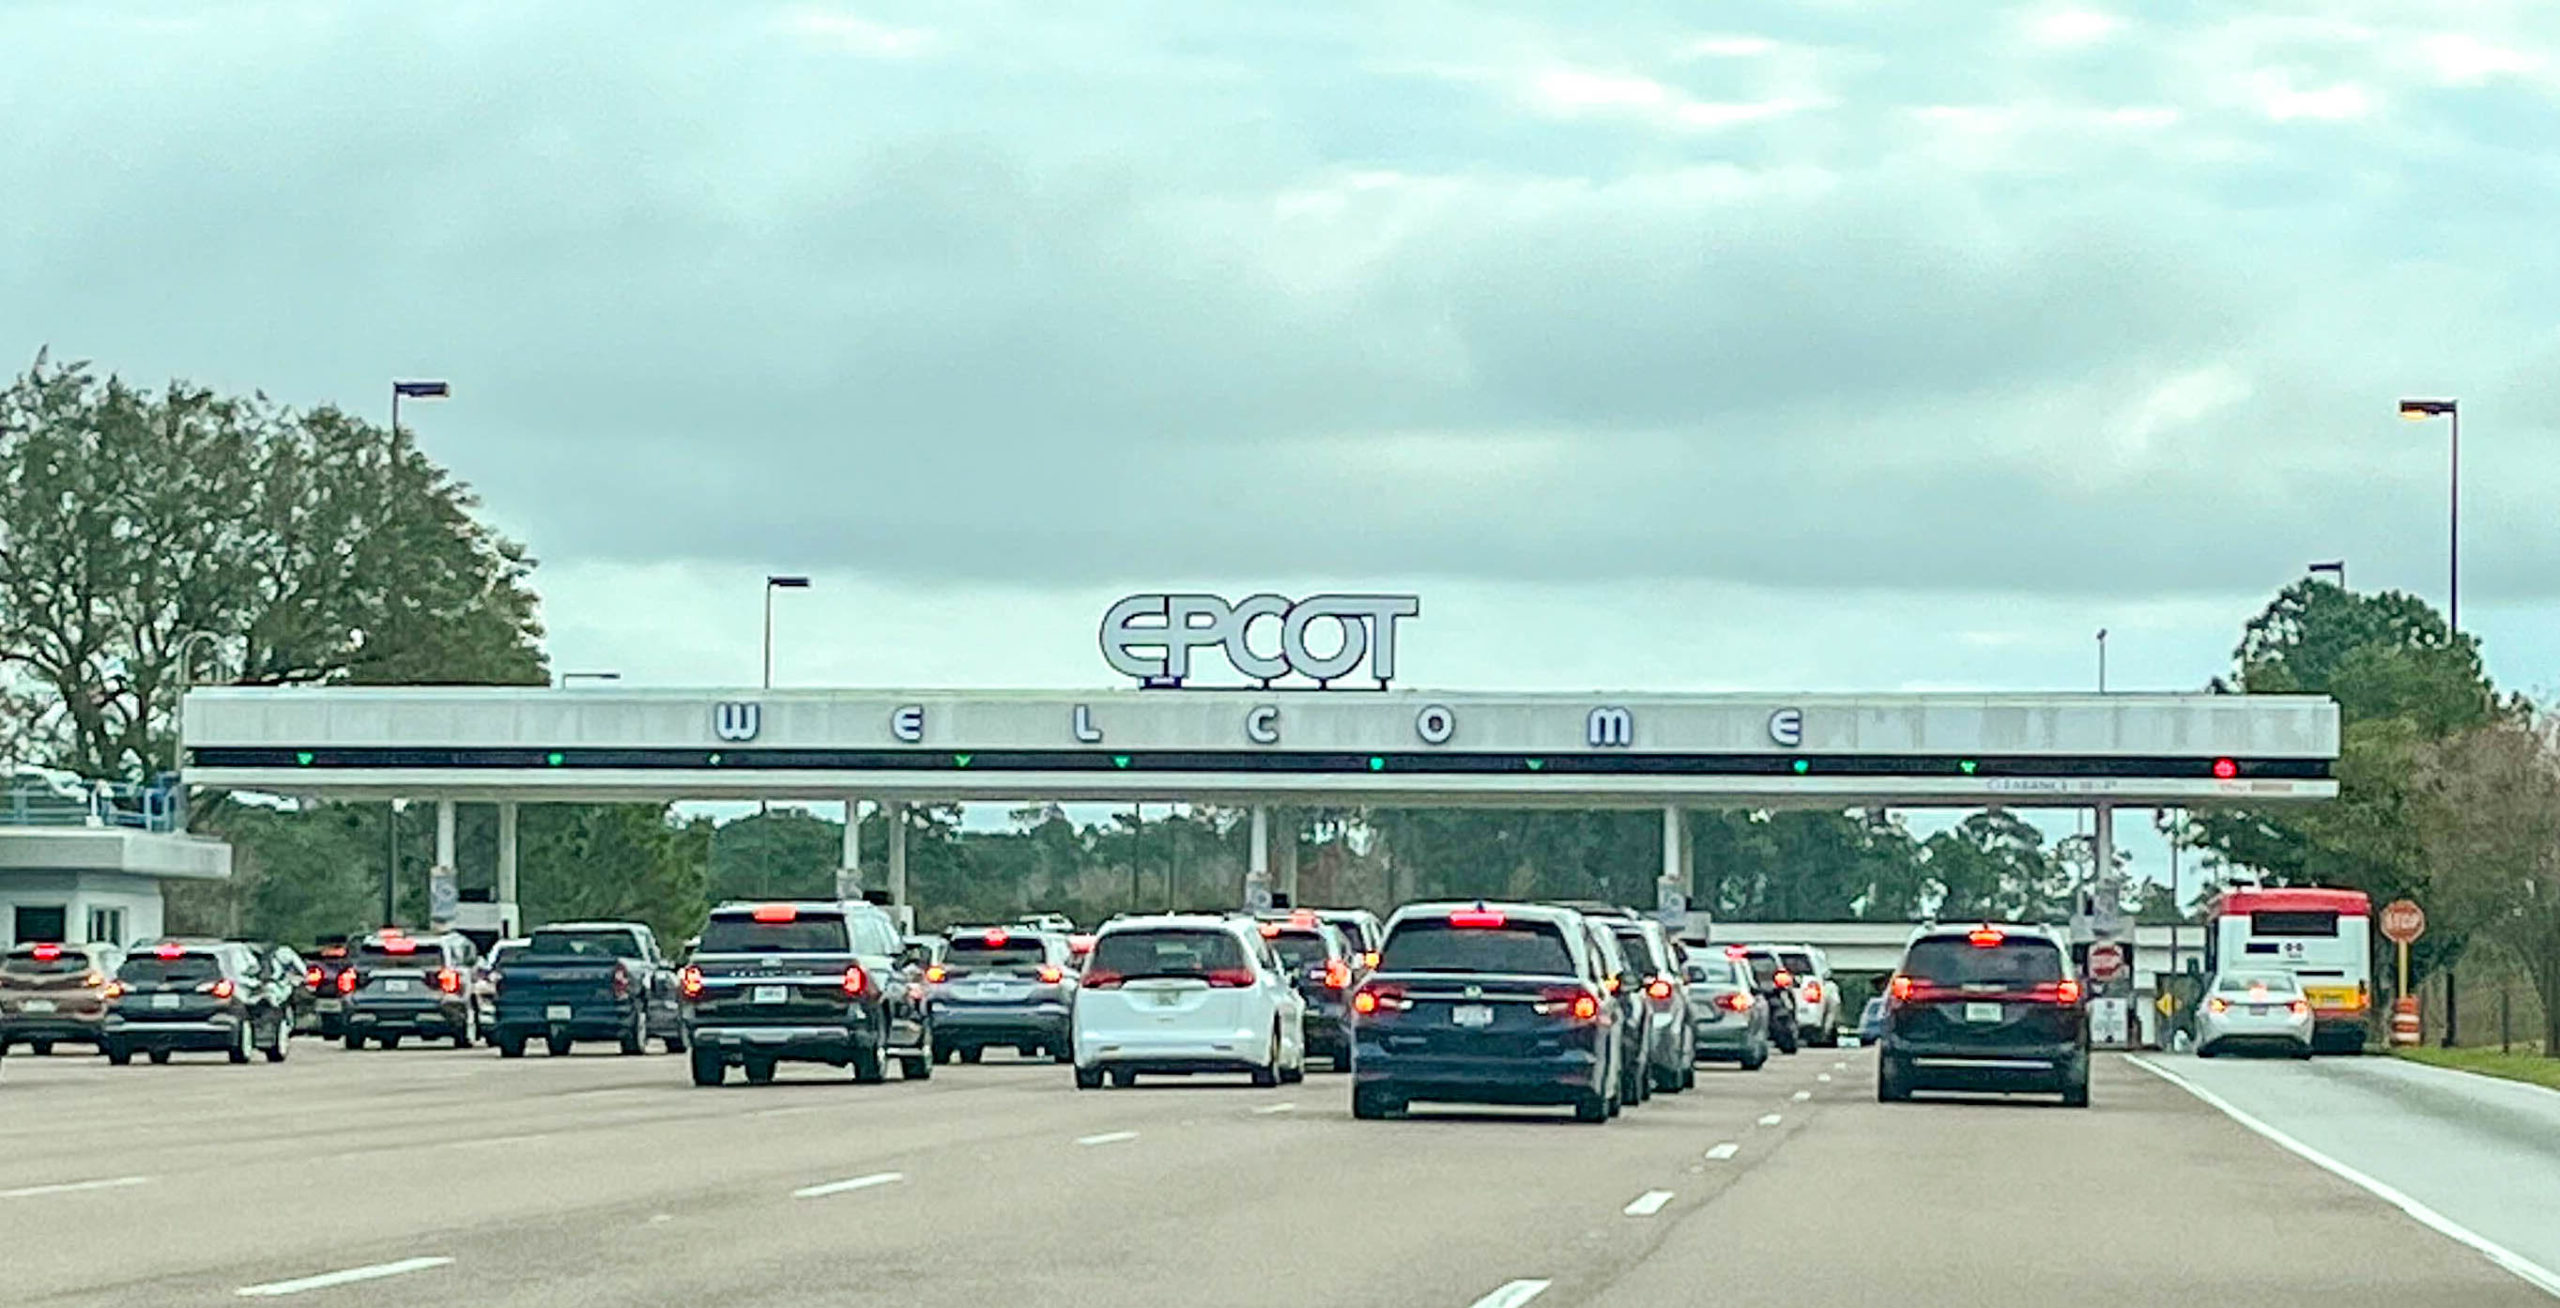 New EPCOT sign!